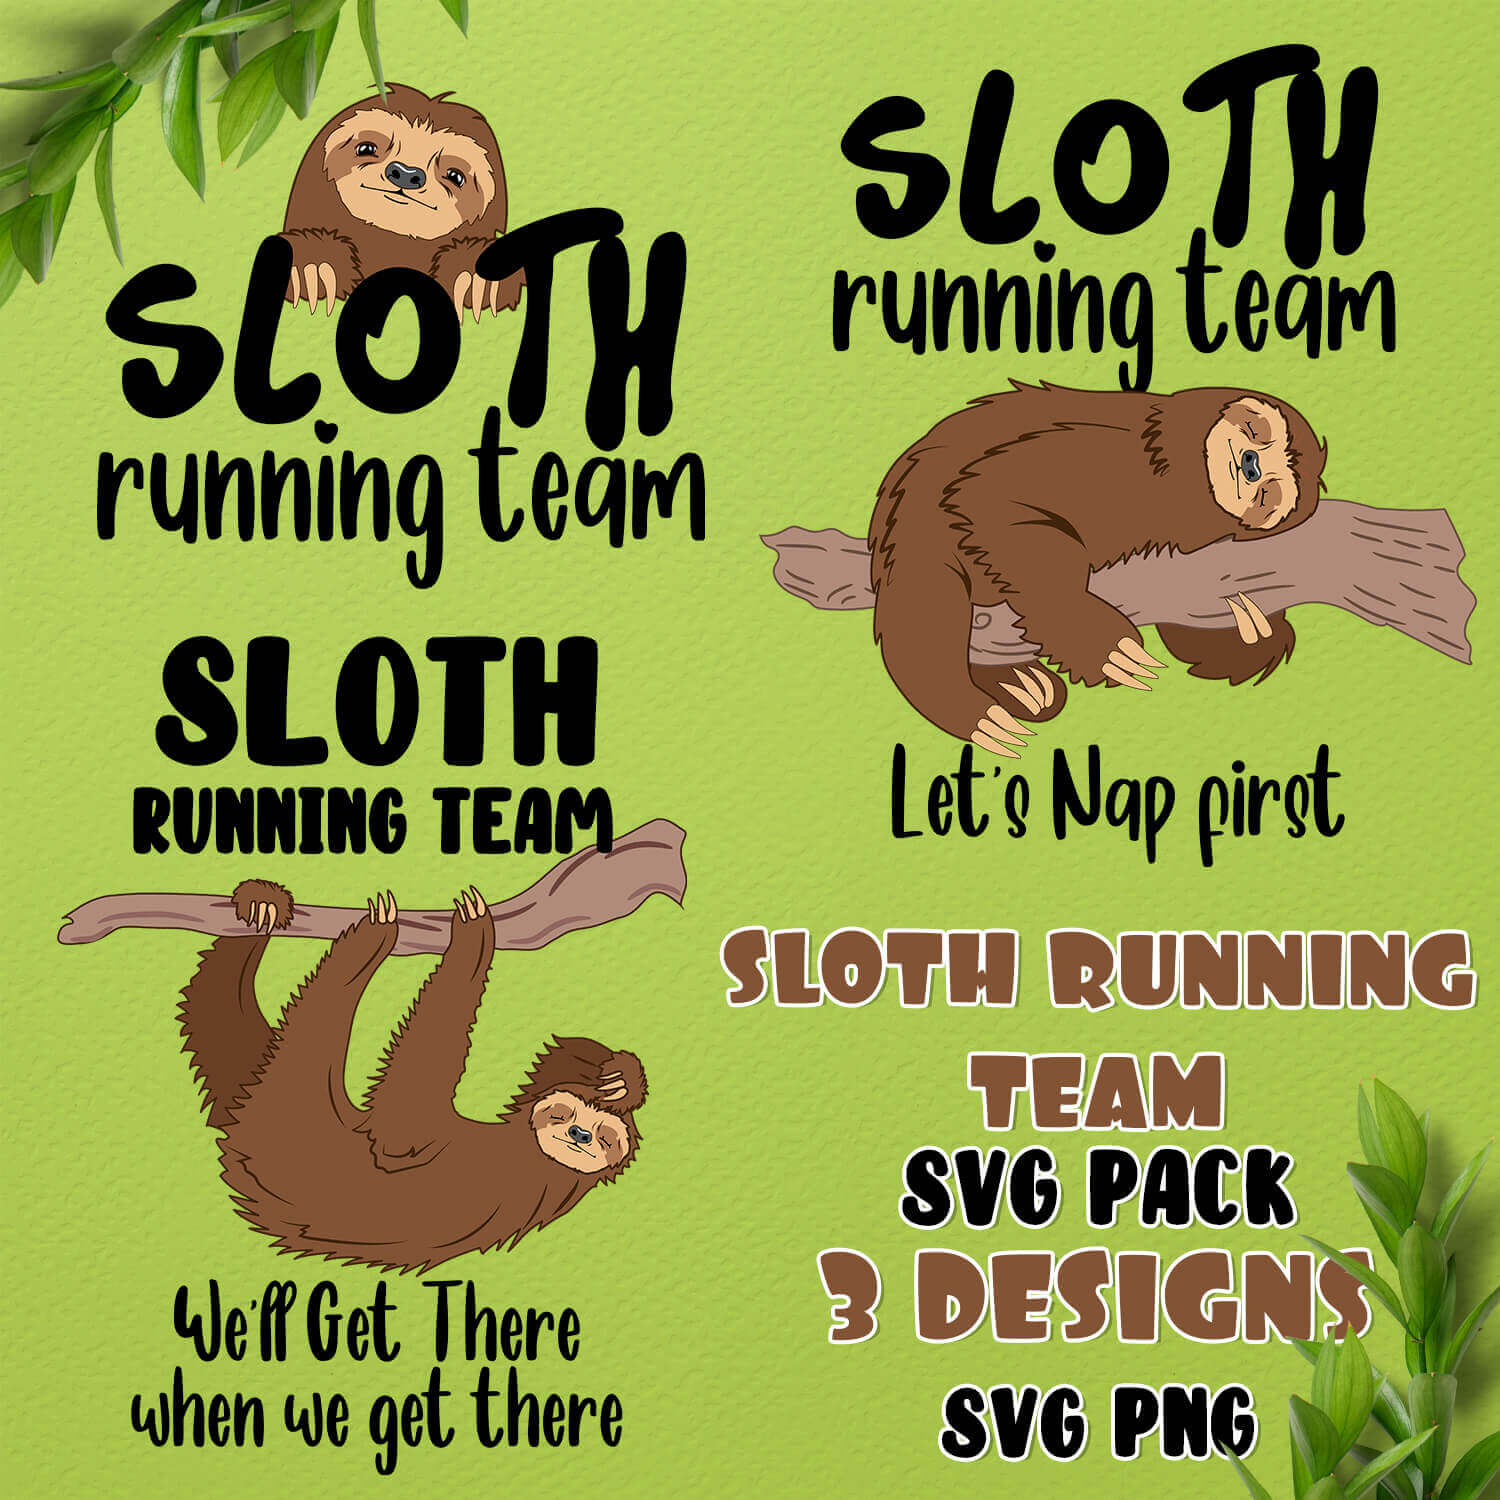 Poster of a sloth running team and a sloth running team.